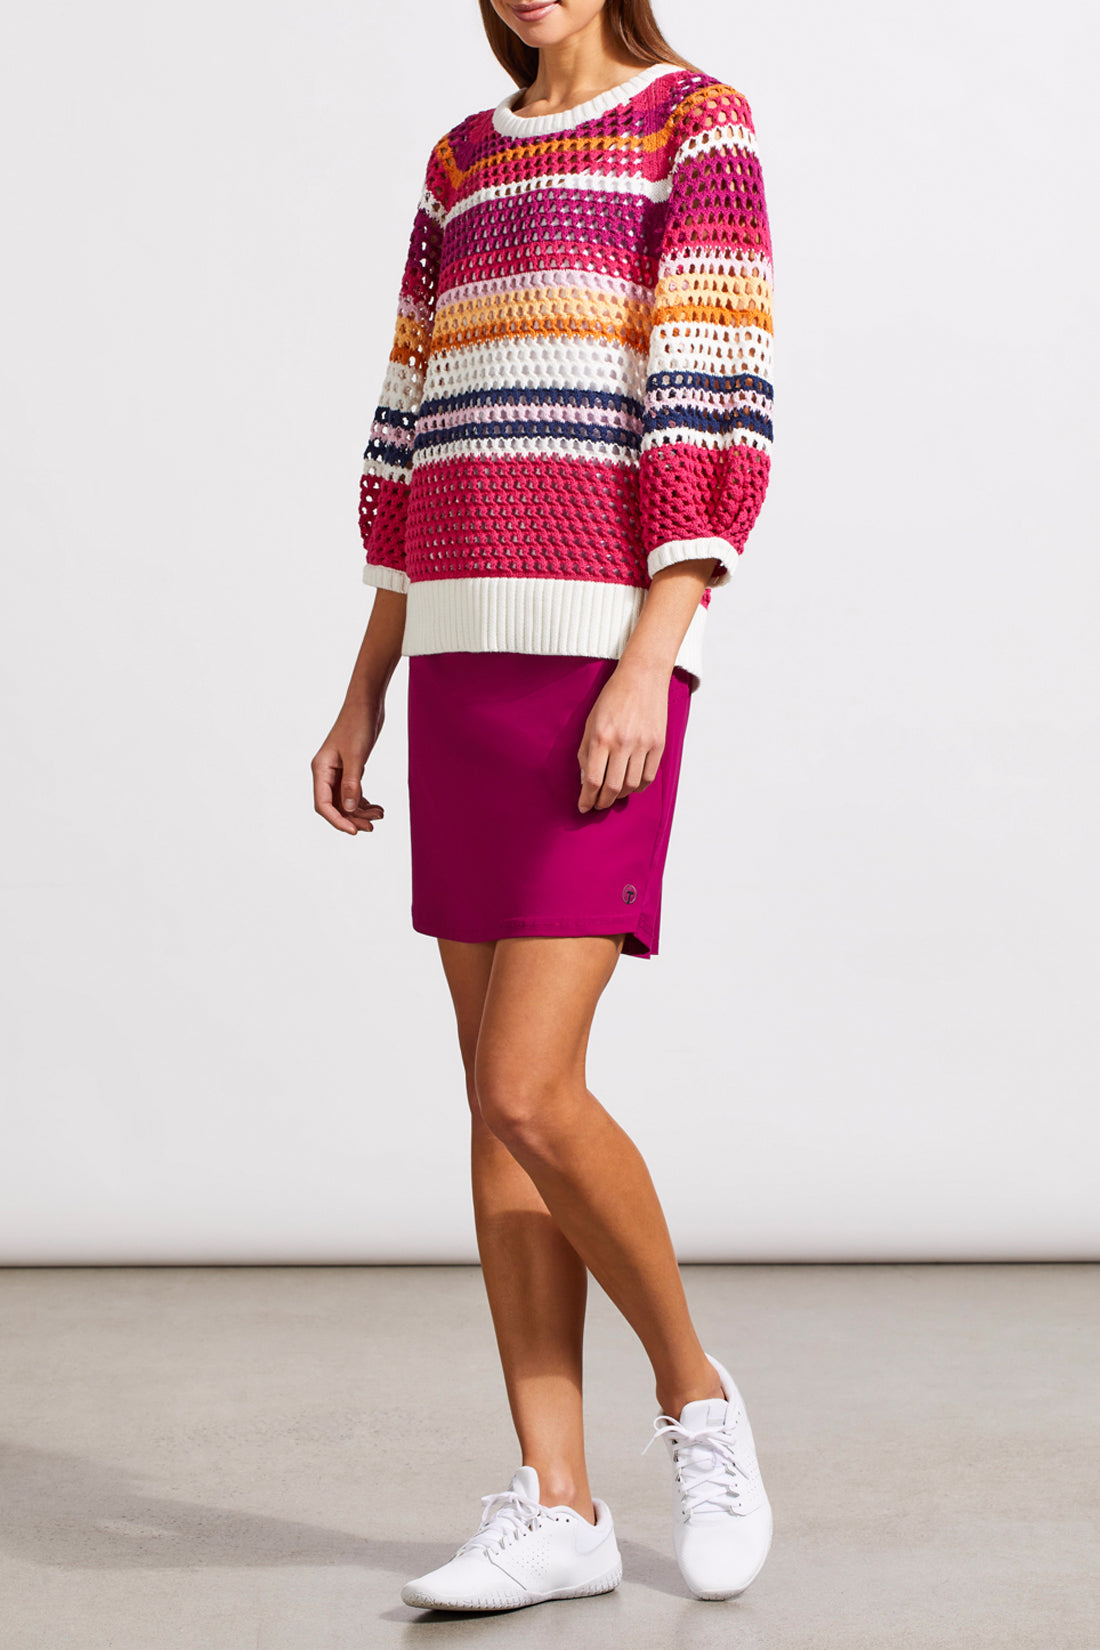 Tribal Elora 3/4 Sleeve Sweater - Tango Pink Clothing - Tops - Sweaters - Pullovers by Tribal | Grace the Boutique